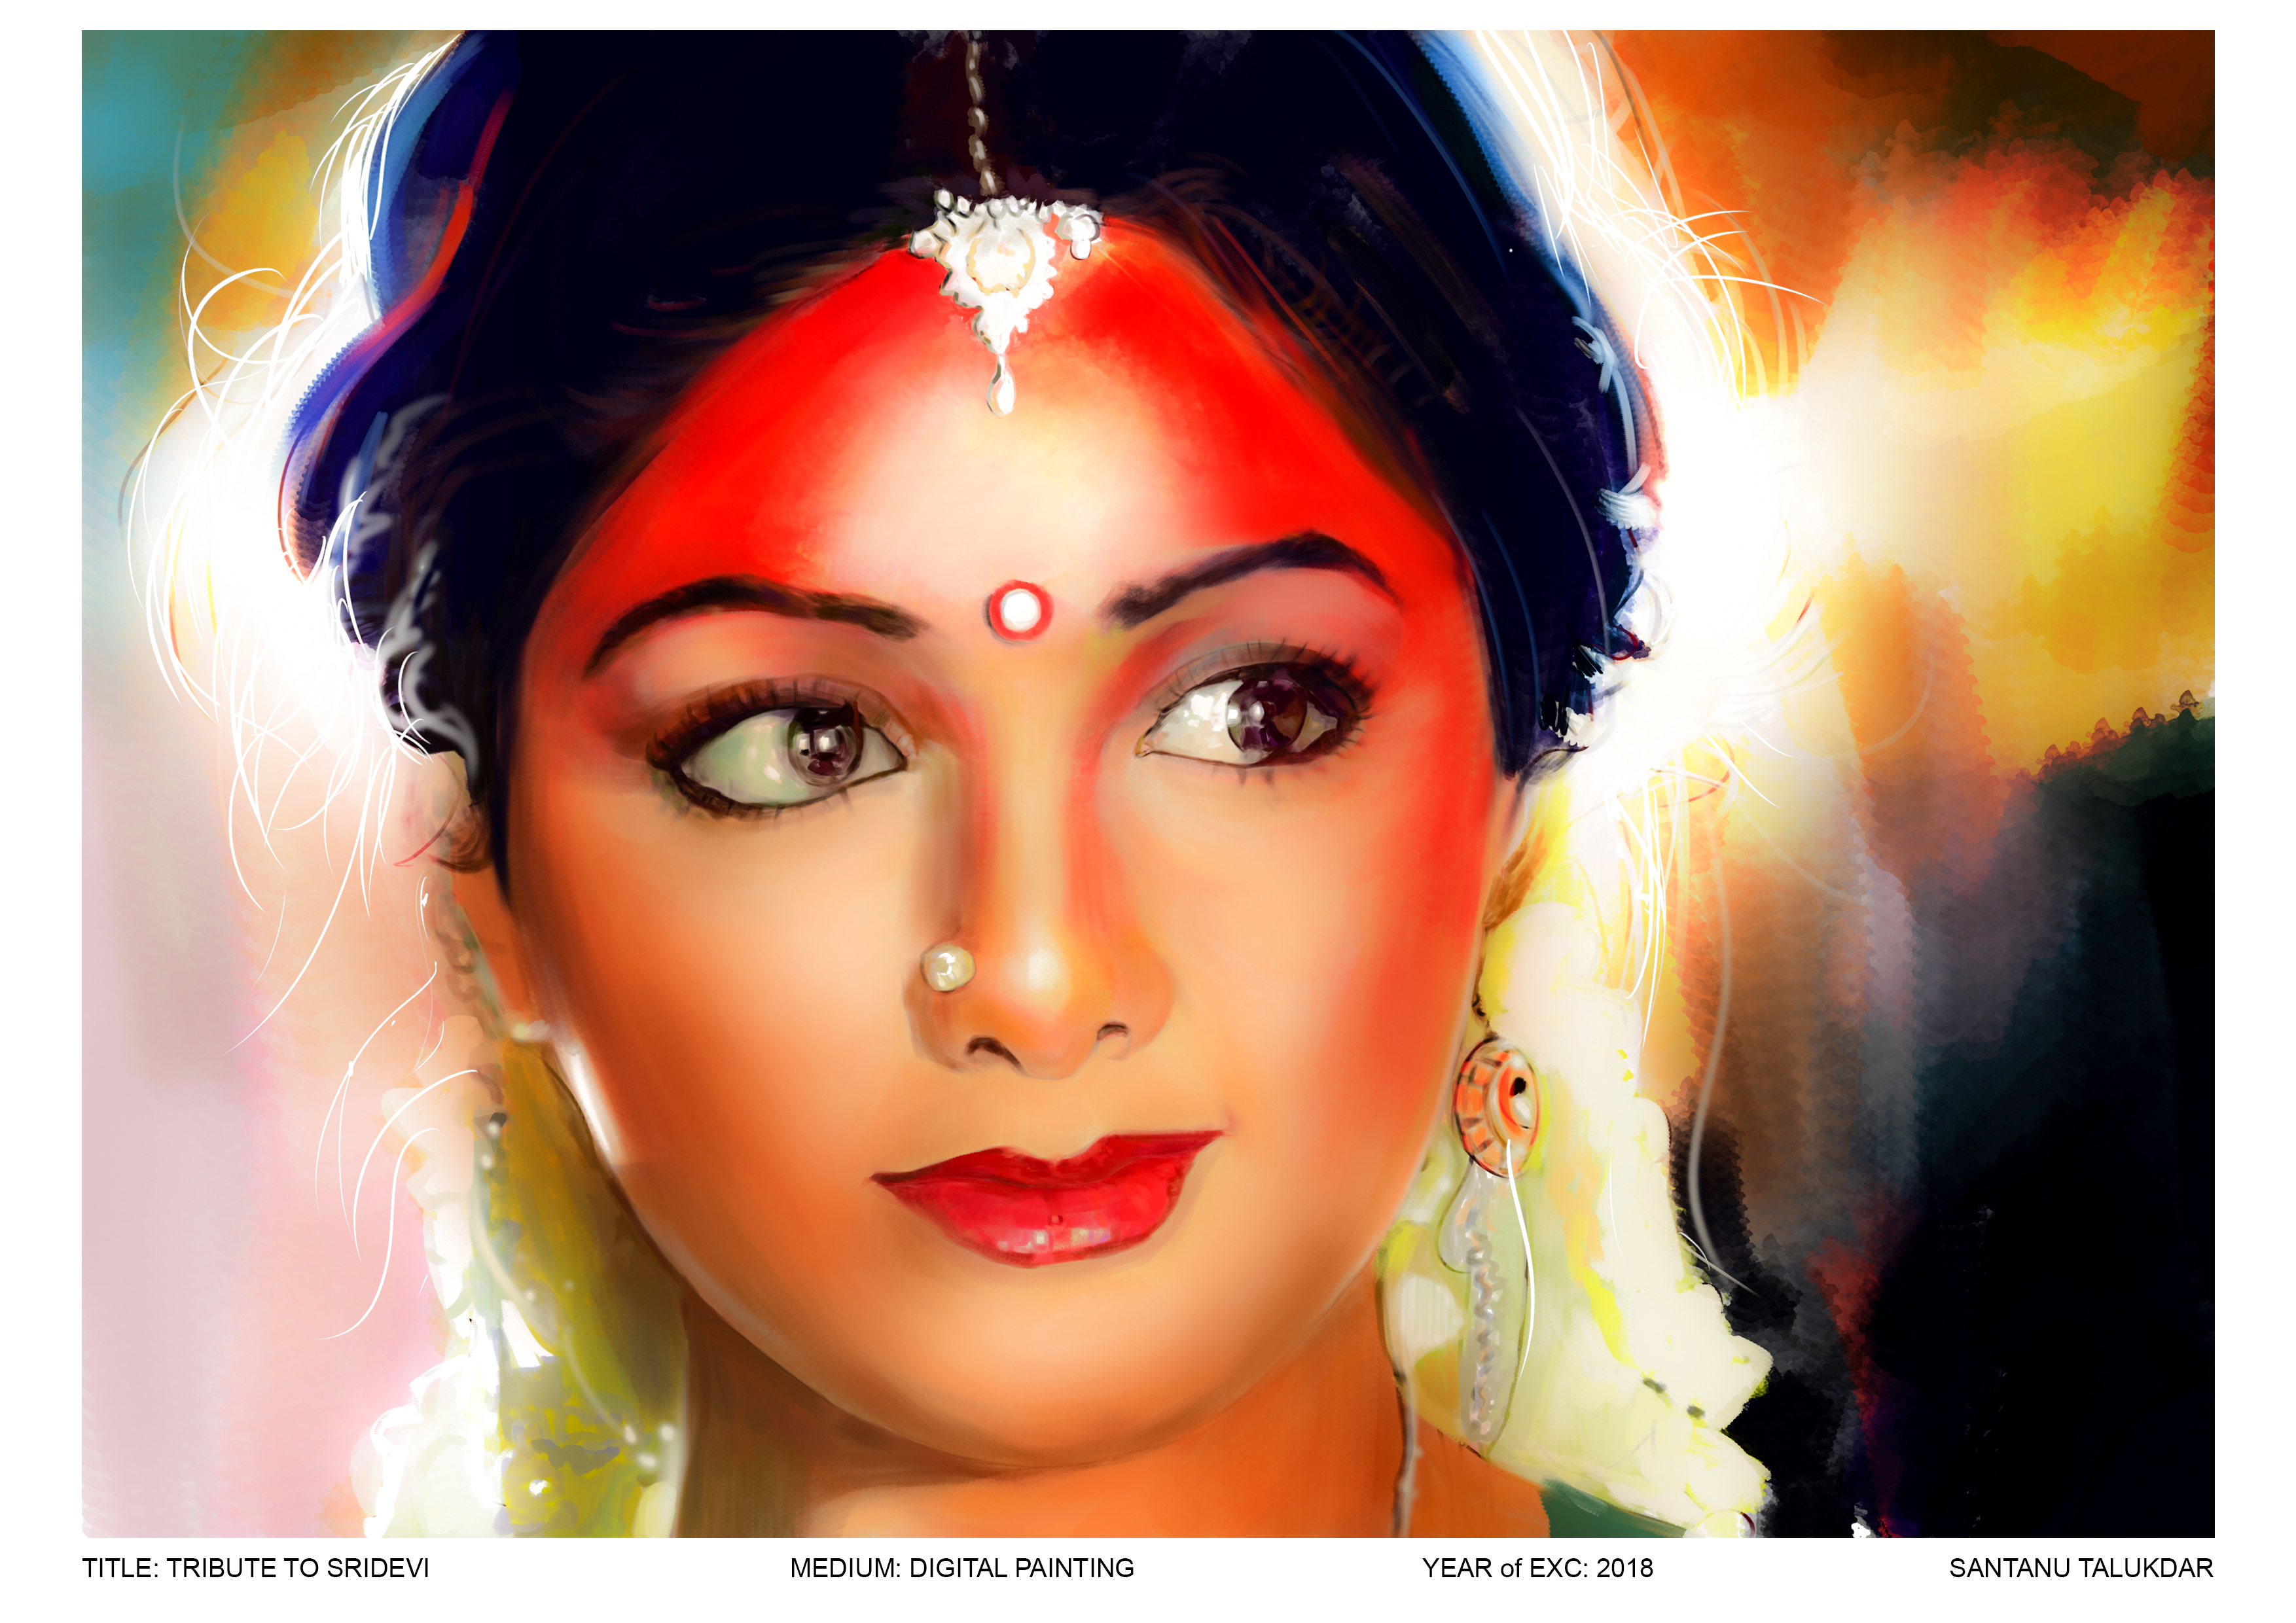 Tribute to SriDevi (DIGITAL PAINTING using by Adobe Photoshop) by Santanut54